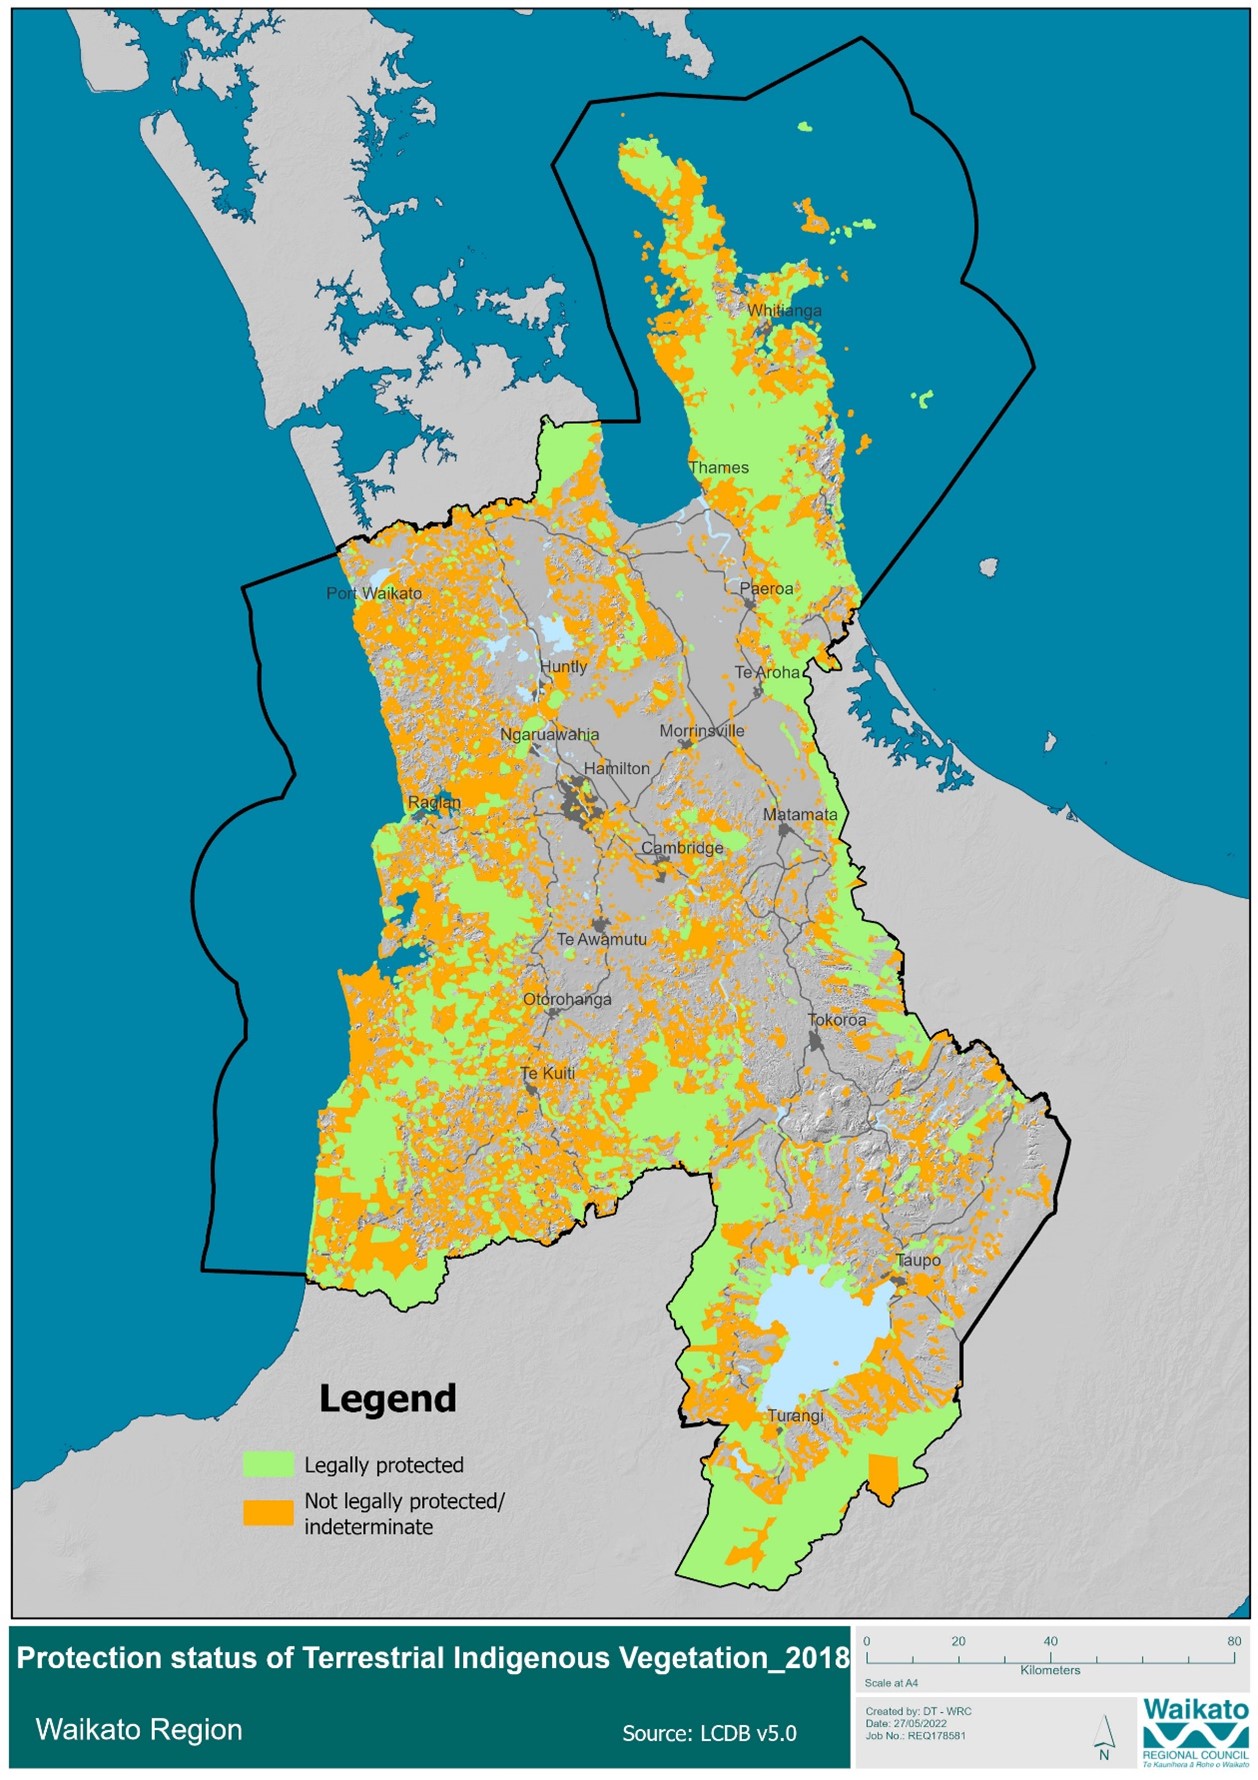 Map showing legally protected and not protected areas of indigenous vegetation in the Waikato